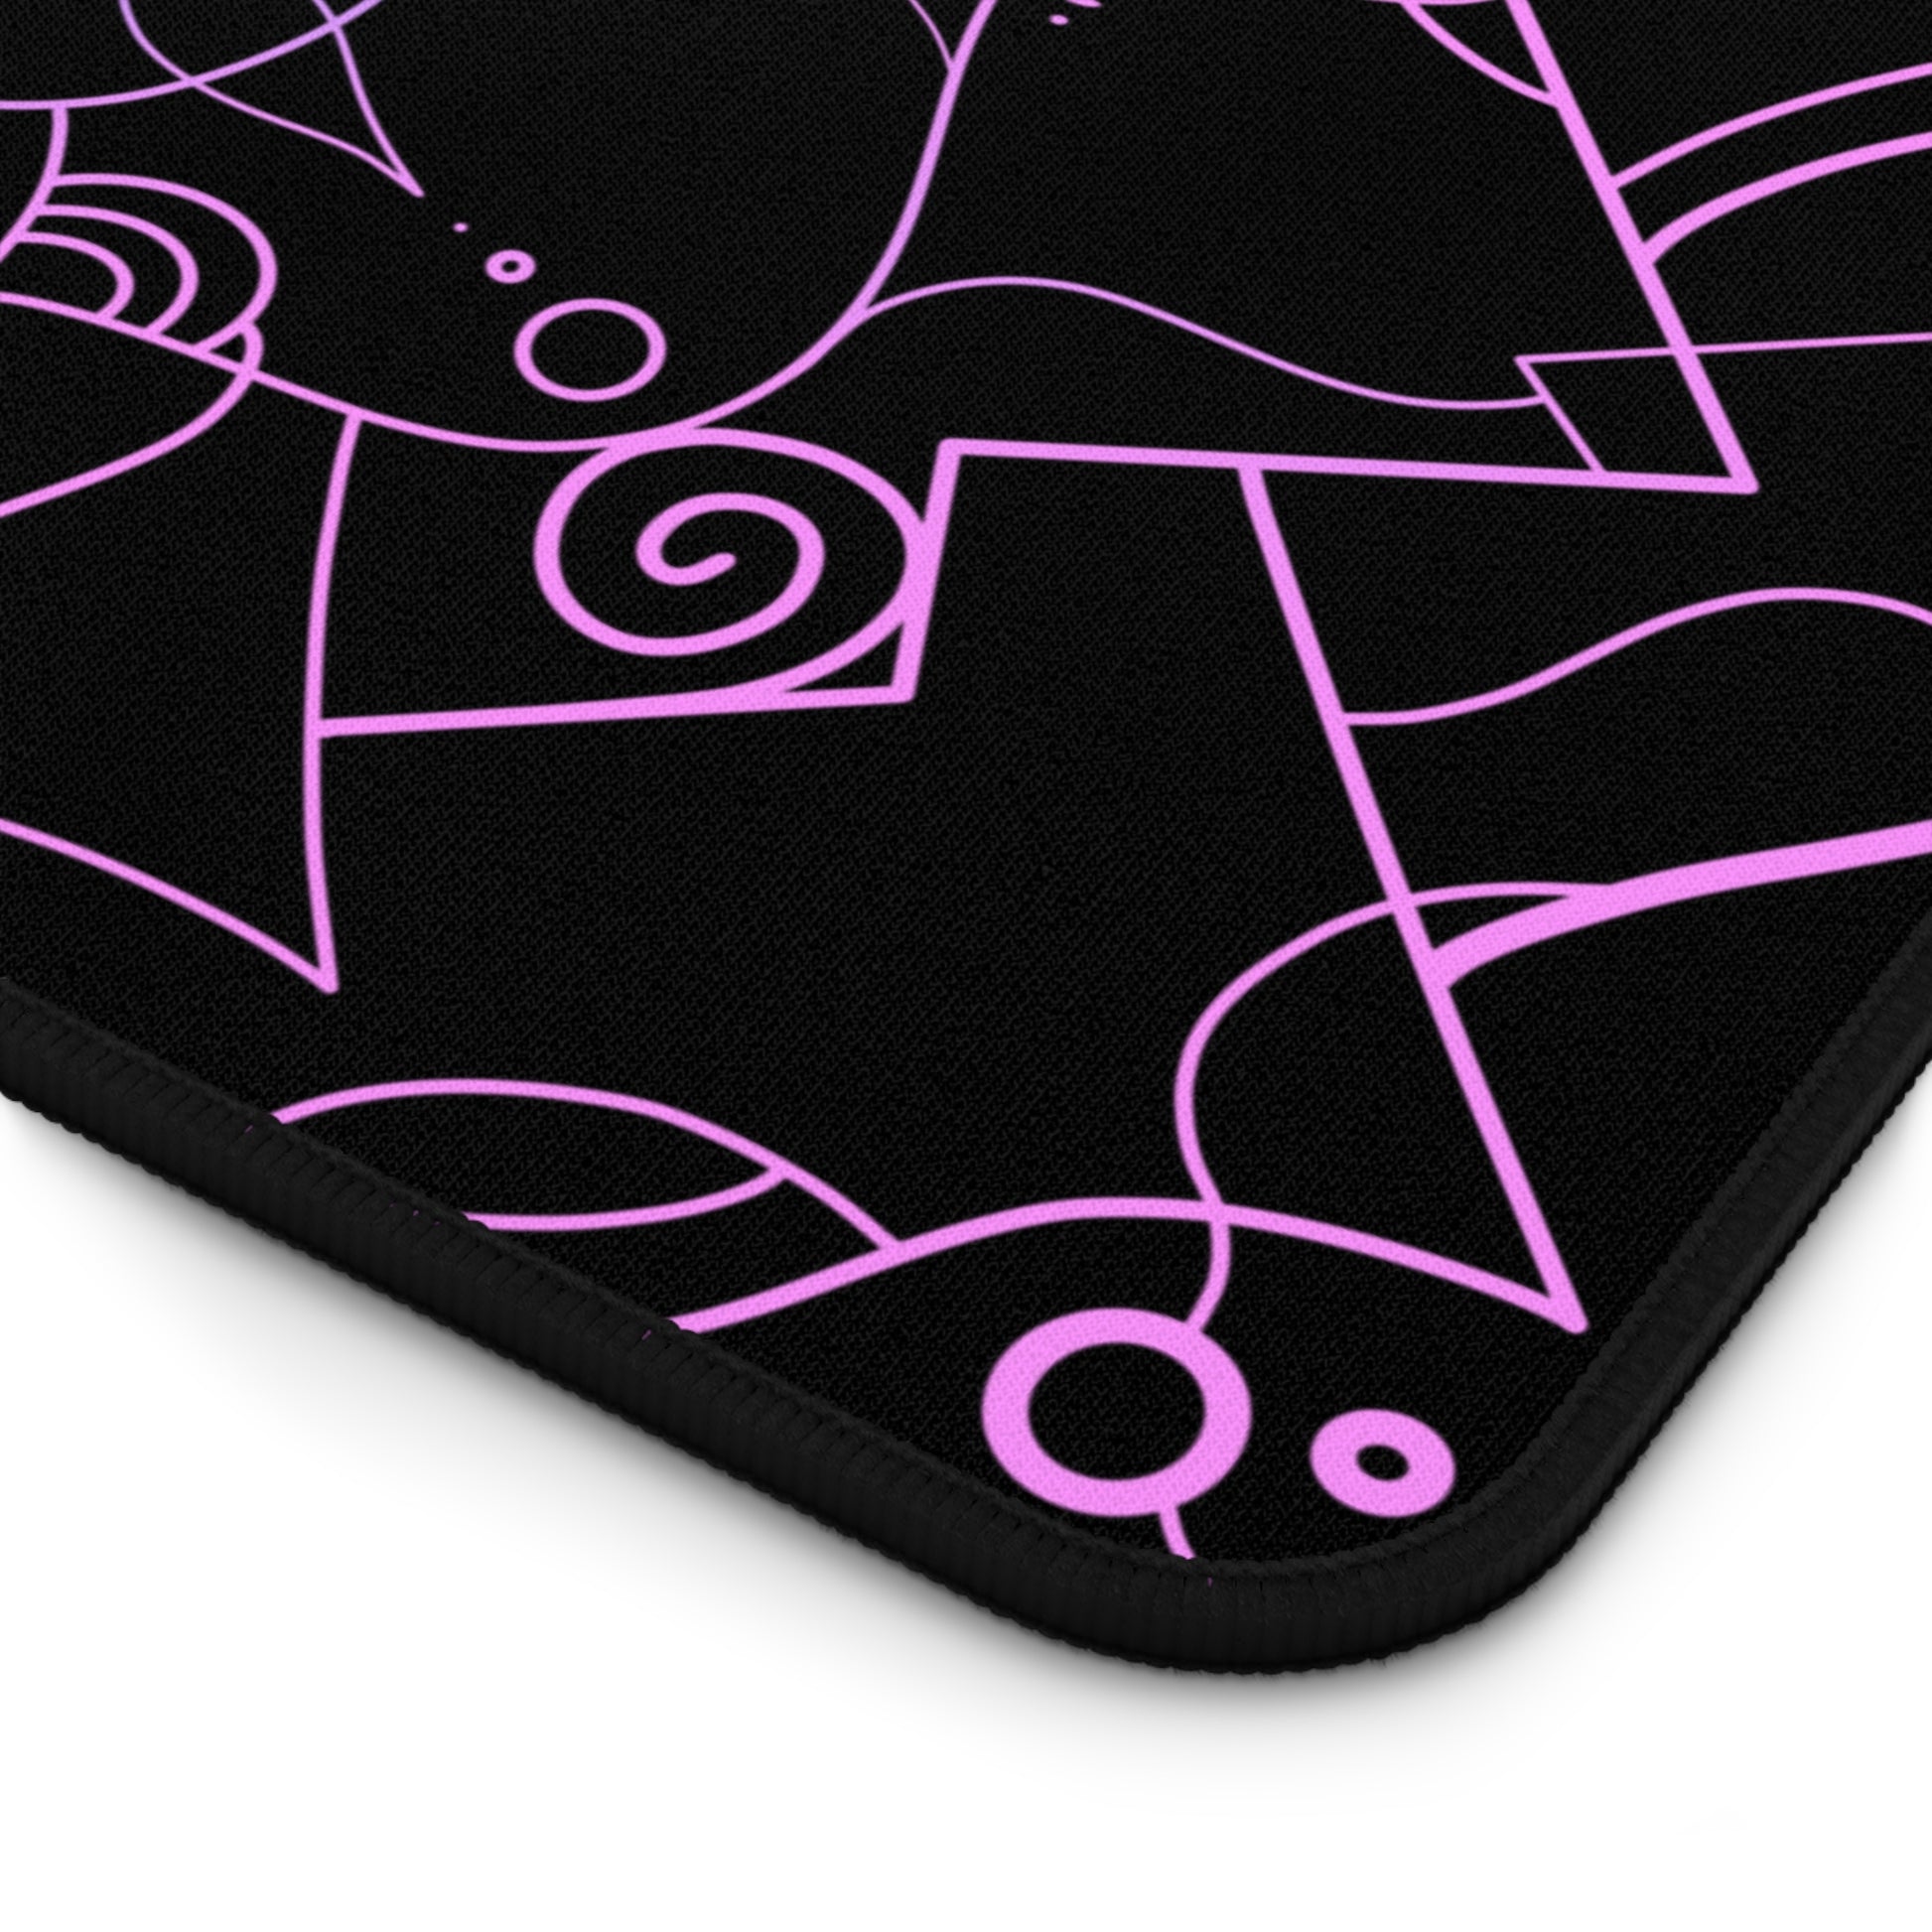 The corner of a 12" x 22" desk mat with a pink and blue mandala pattern on a black background.